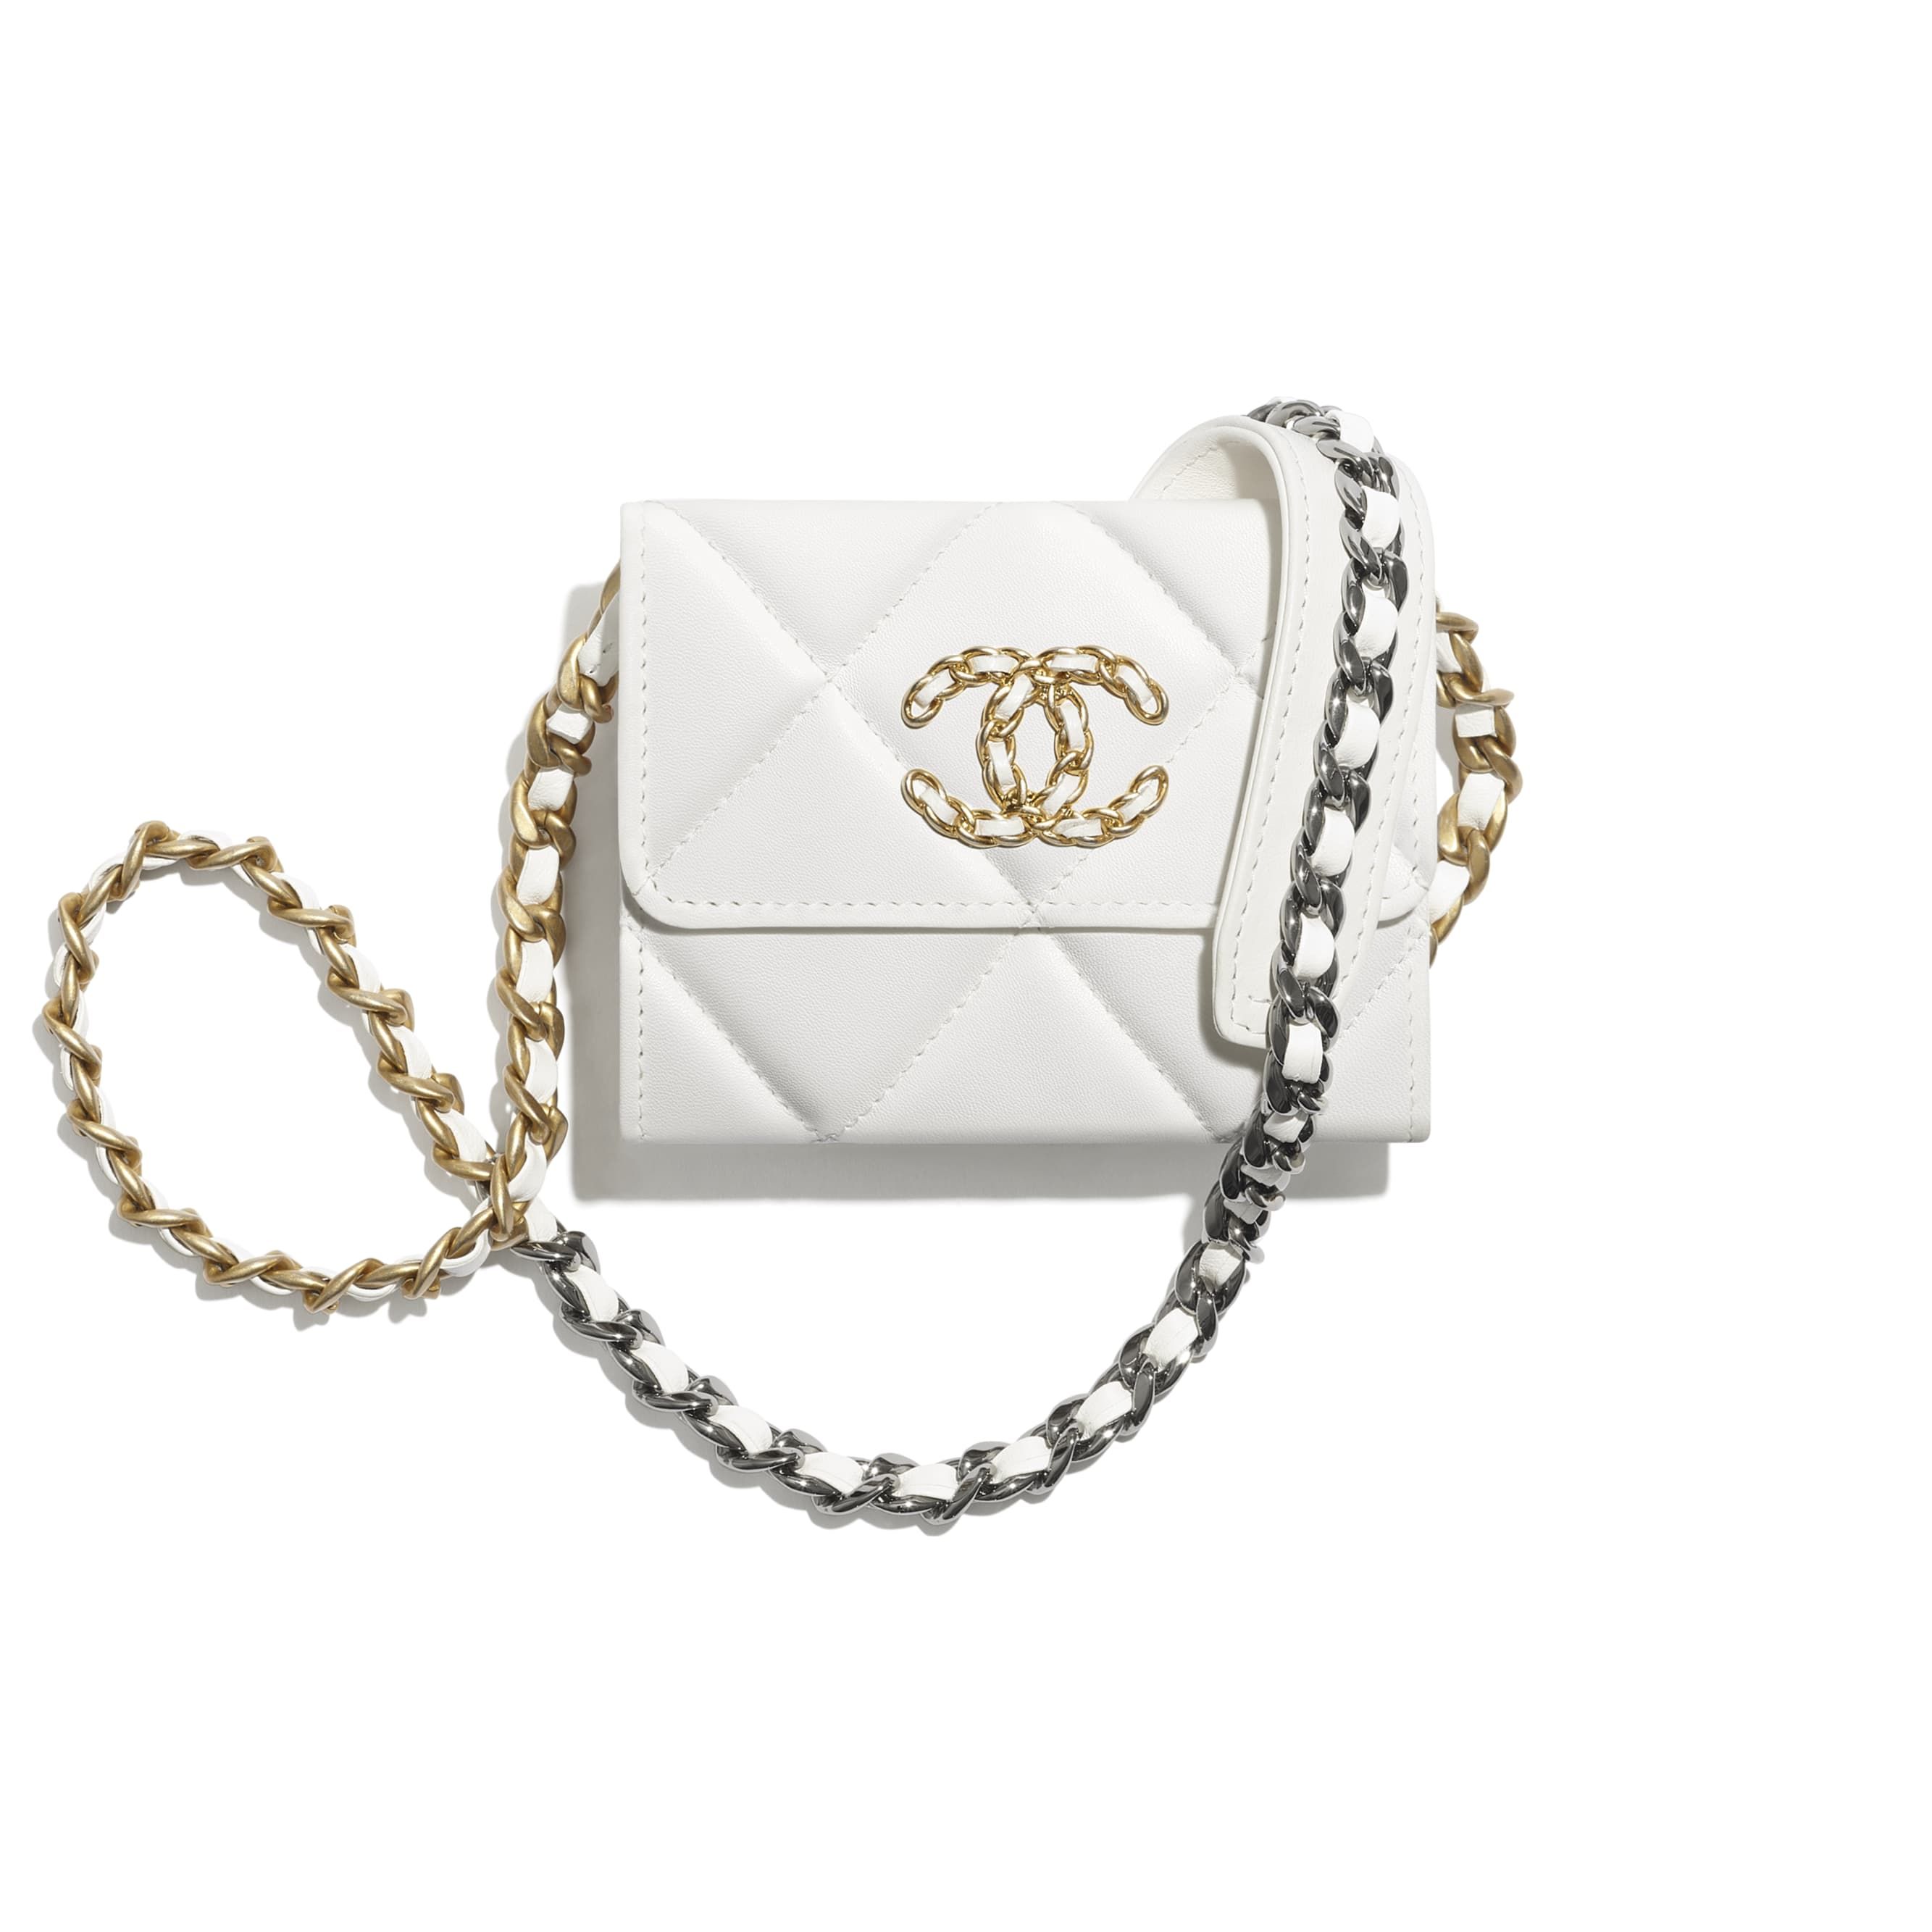 CHANEL 19 Flap Coin Purse with Chain | Chanel, Inc. (US)